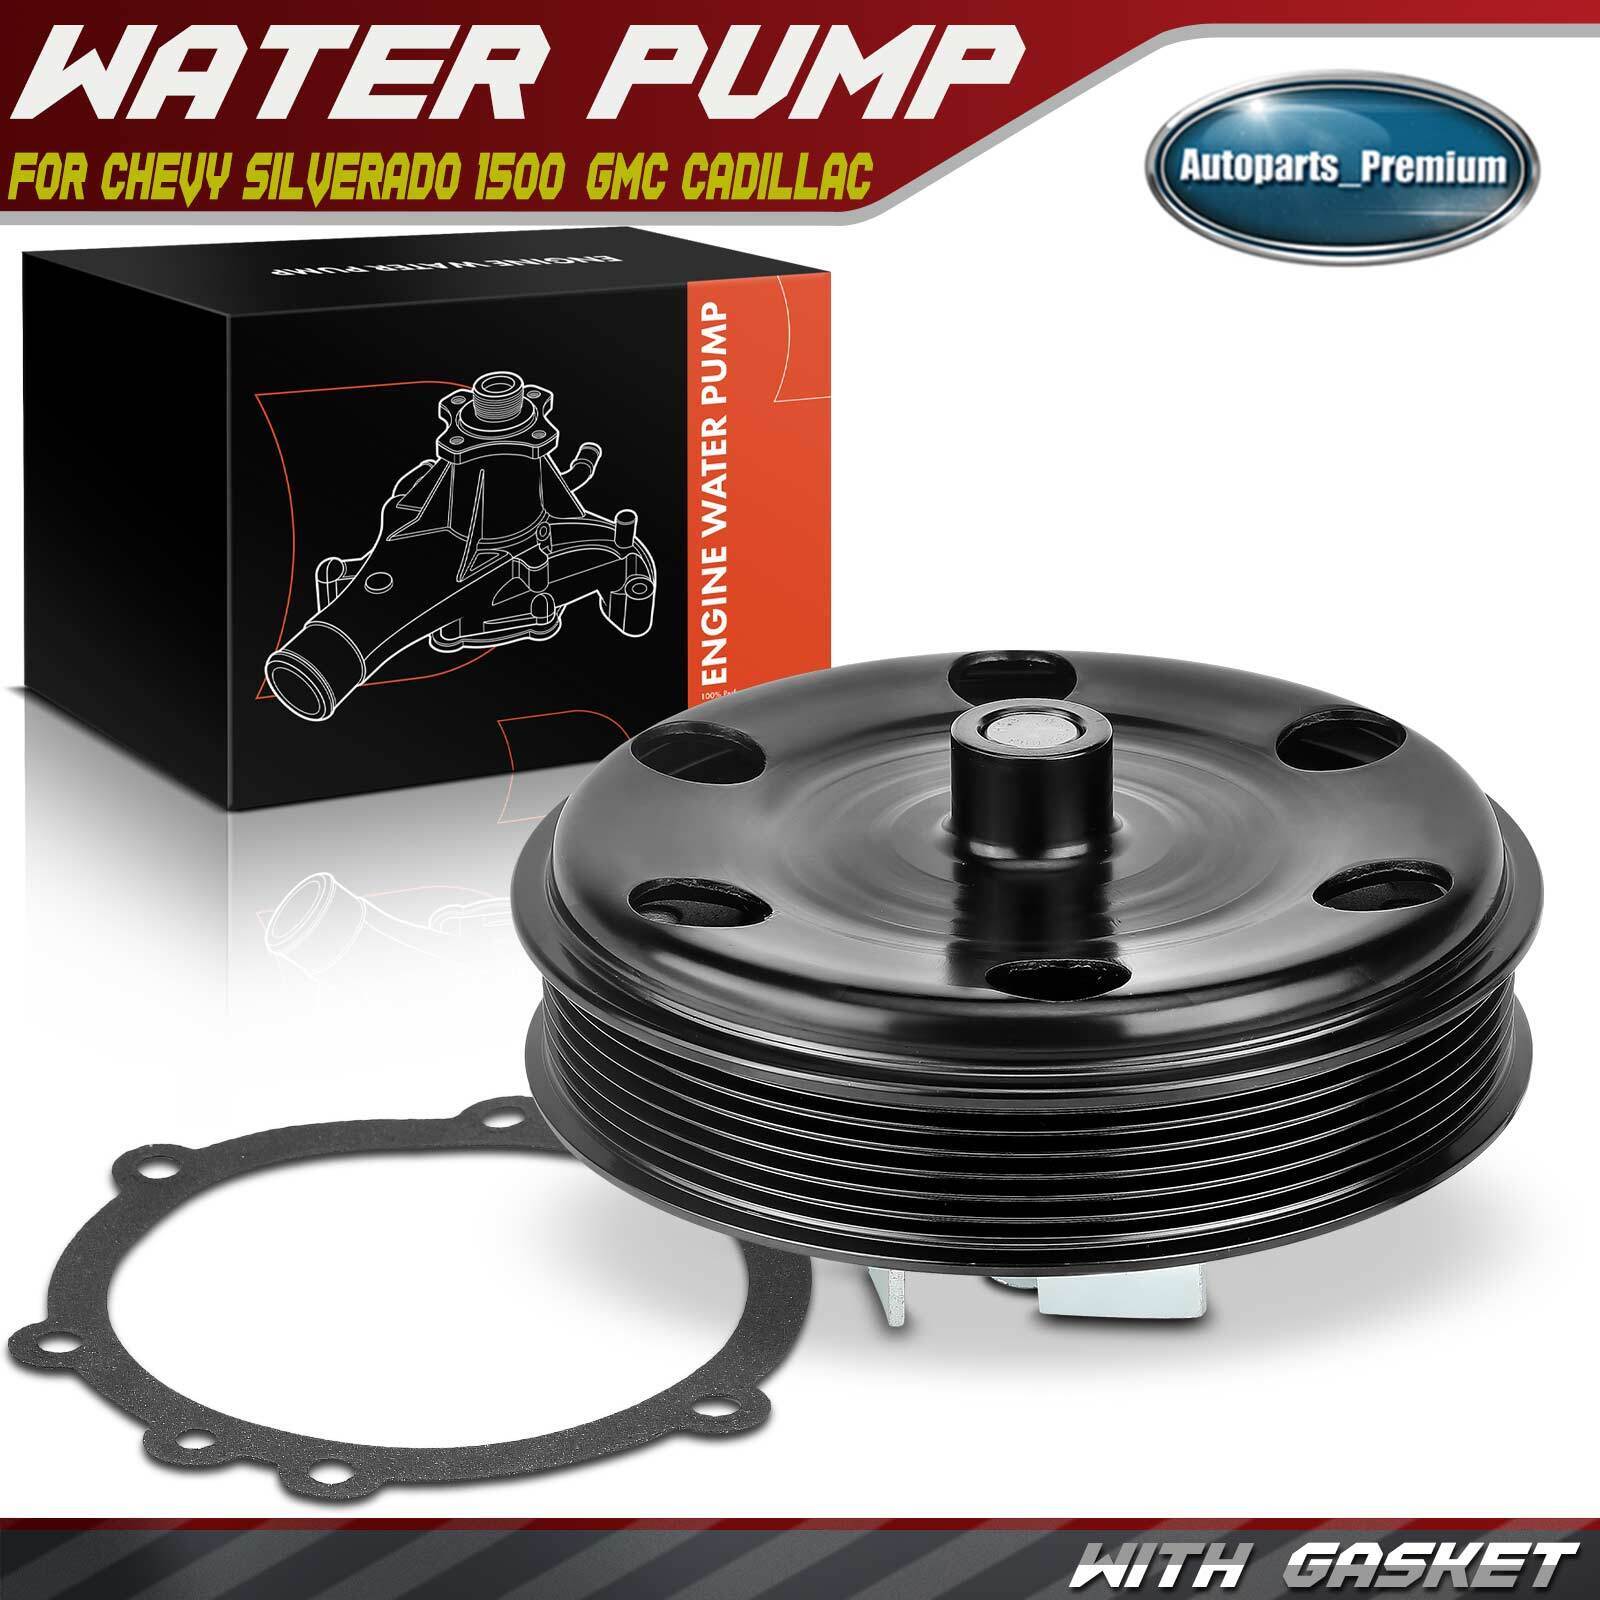 New Water Pump with Gasket for Chevrolet Silverado 1500	GMC Yukon Cadillac CTS